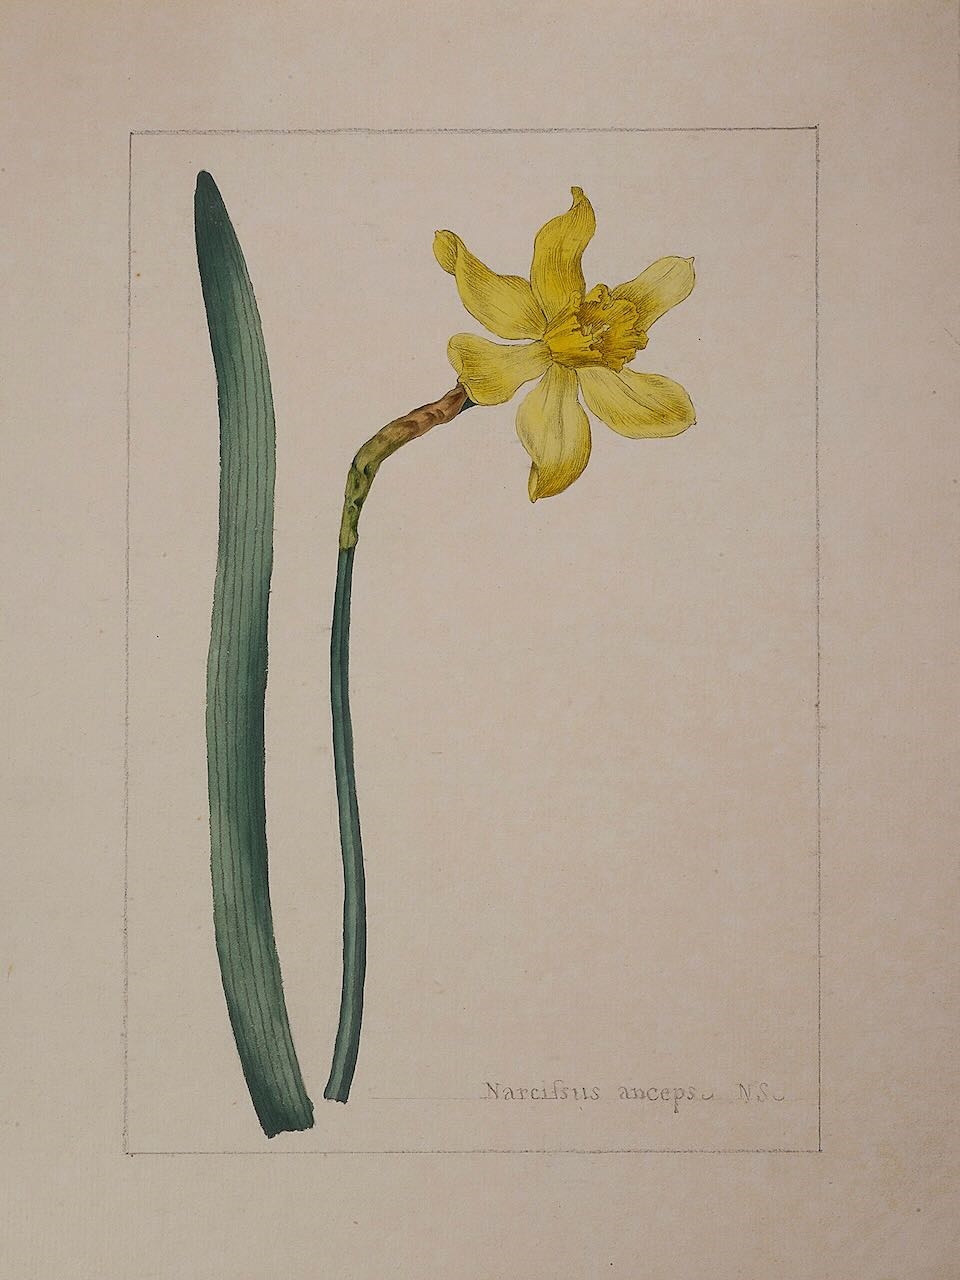 Artwork by Sydenham Teast Edwards, Narcissus Anceps N.S., Made of watercolour and pencil